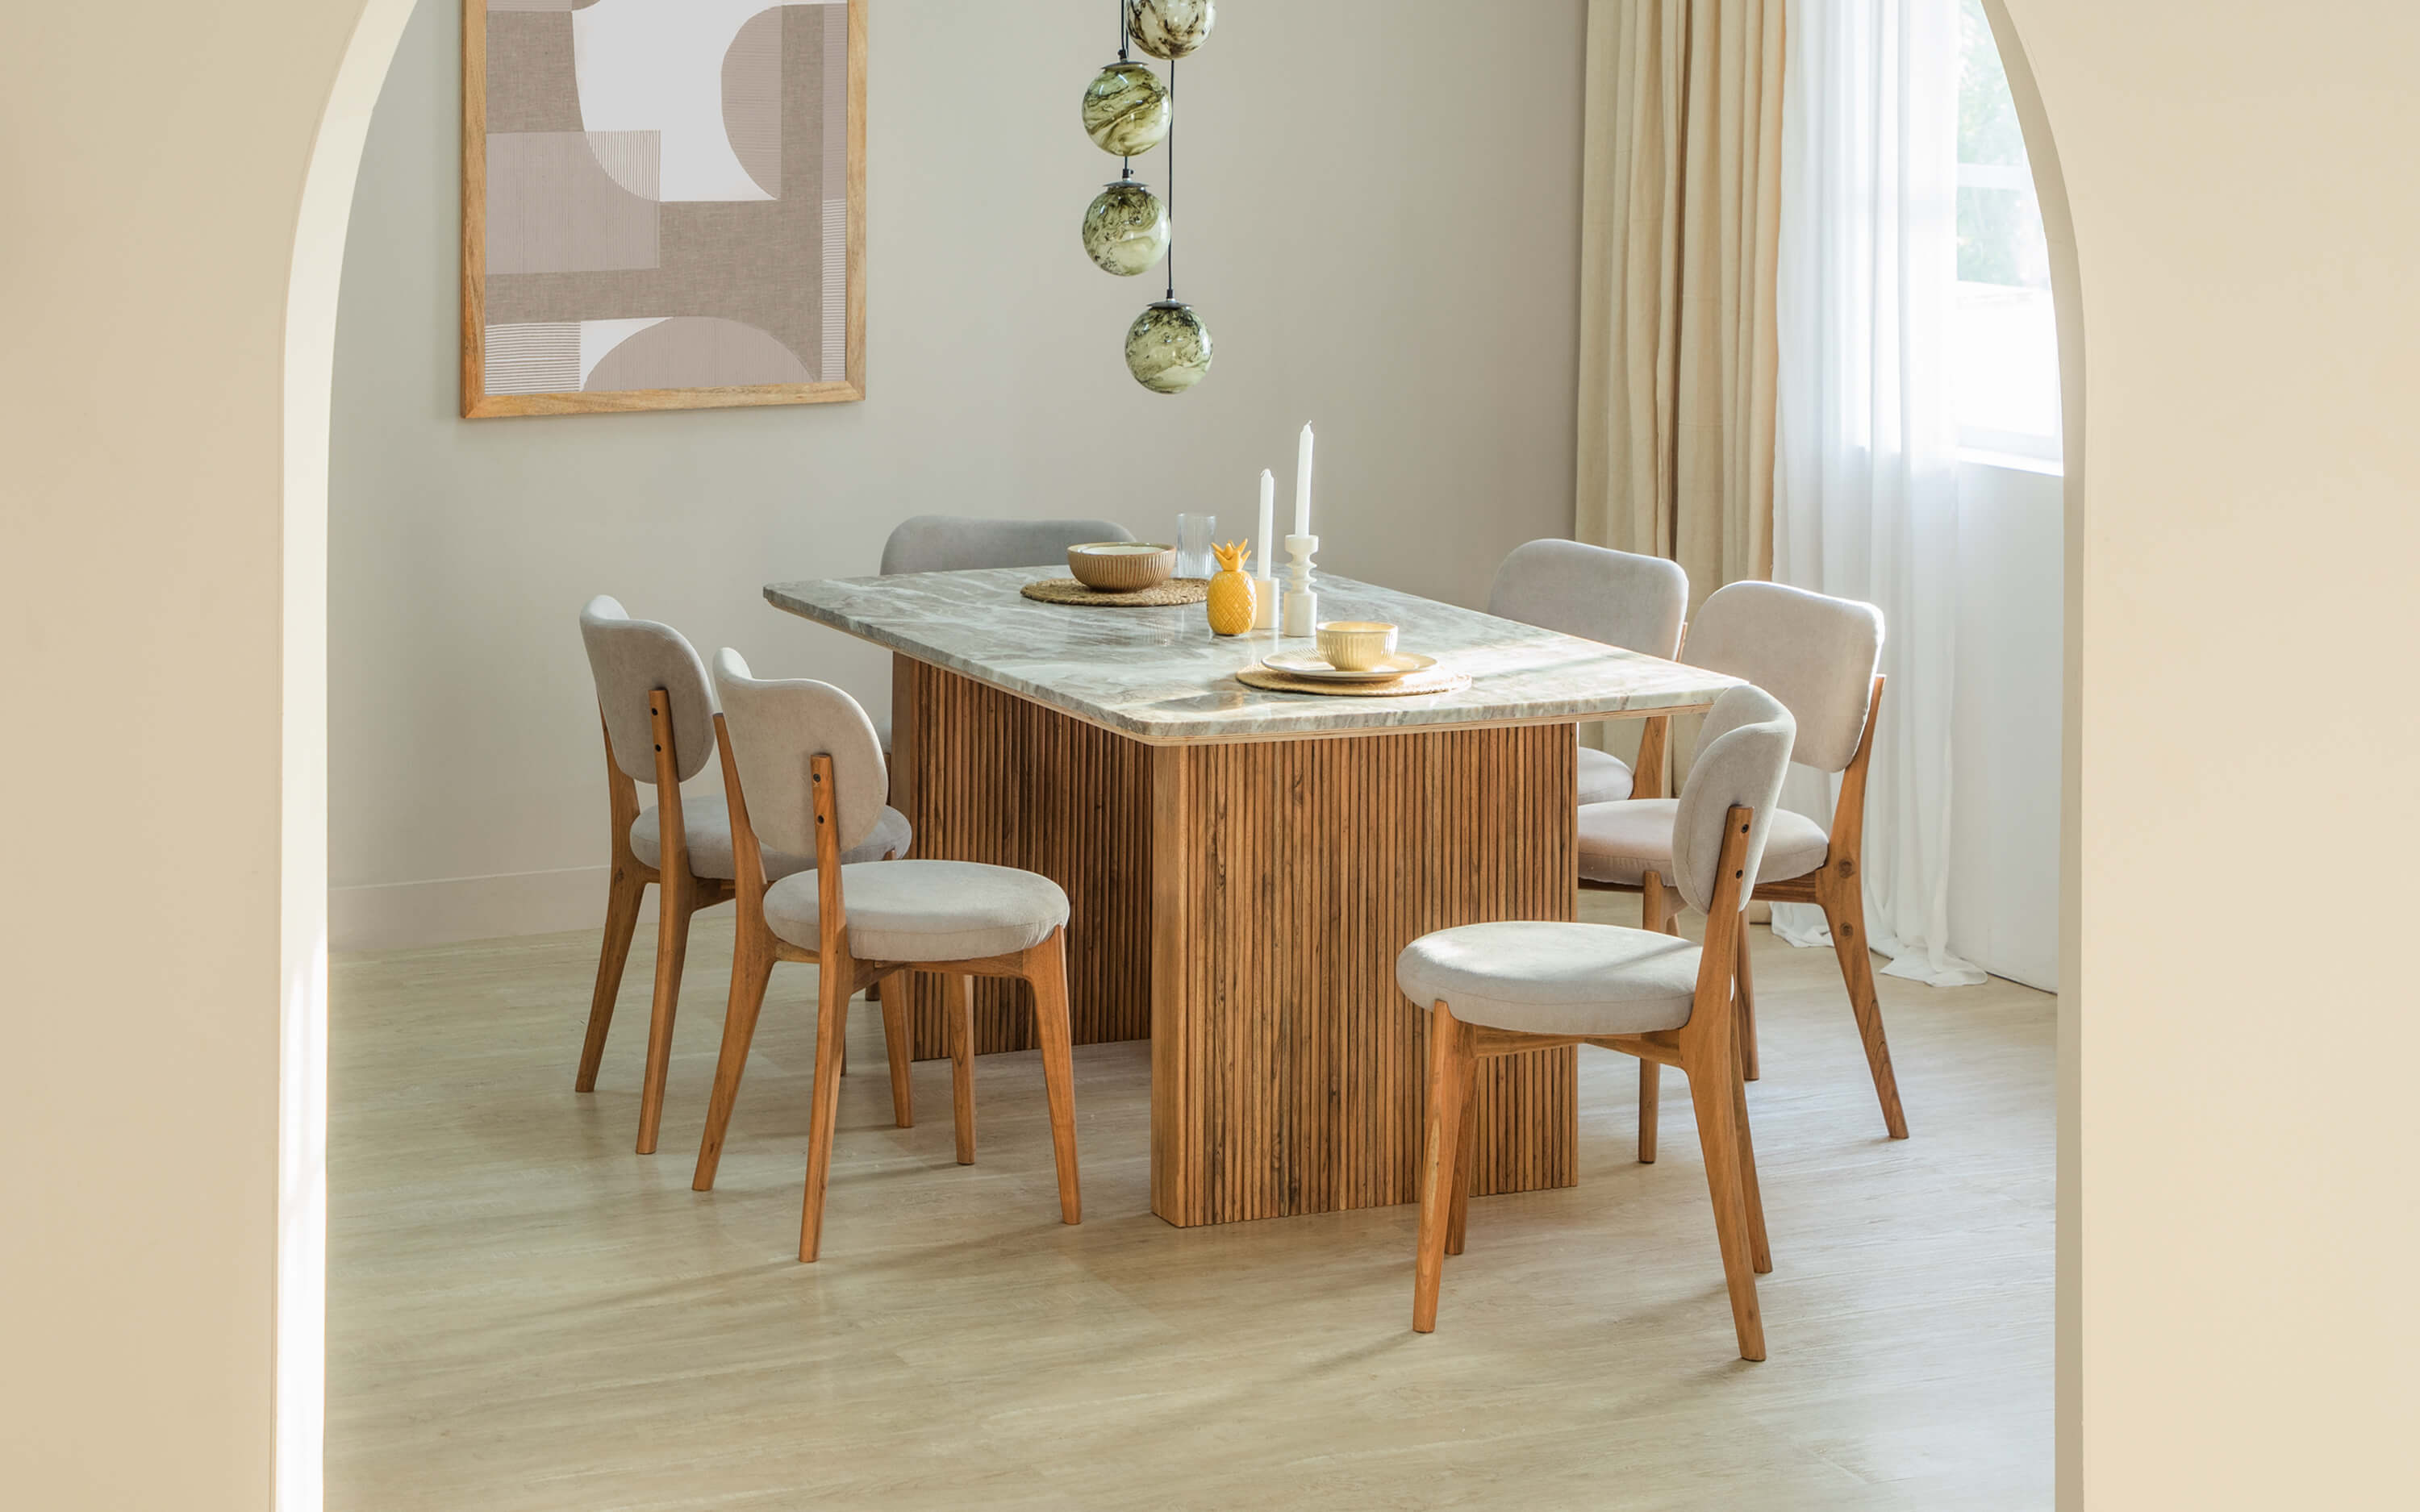 Hiro Marble Top Dining Table 6 seater. Orange Tree Home.